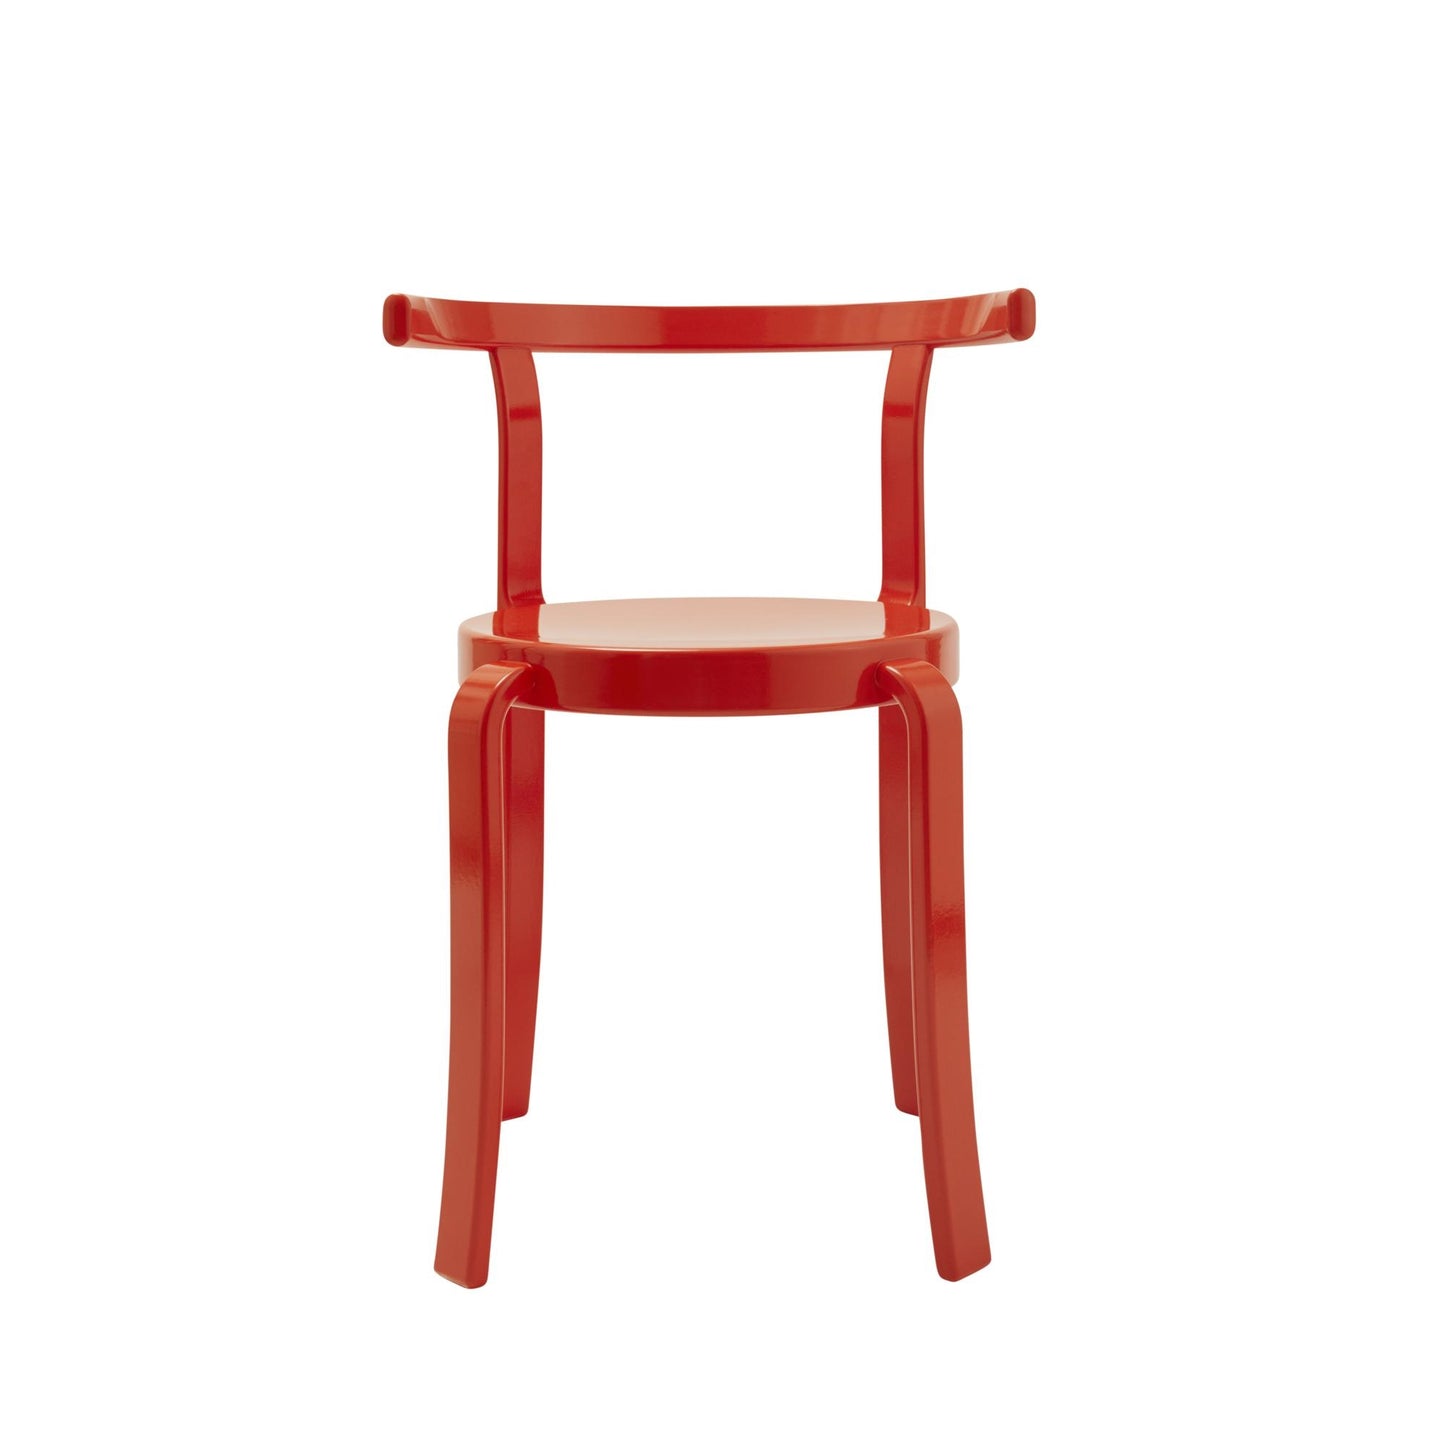 8000 Series Dining Chair by Magnus Olesen #Beech / Retro Red